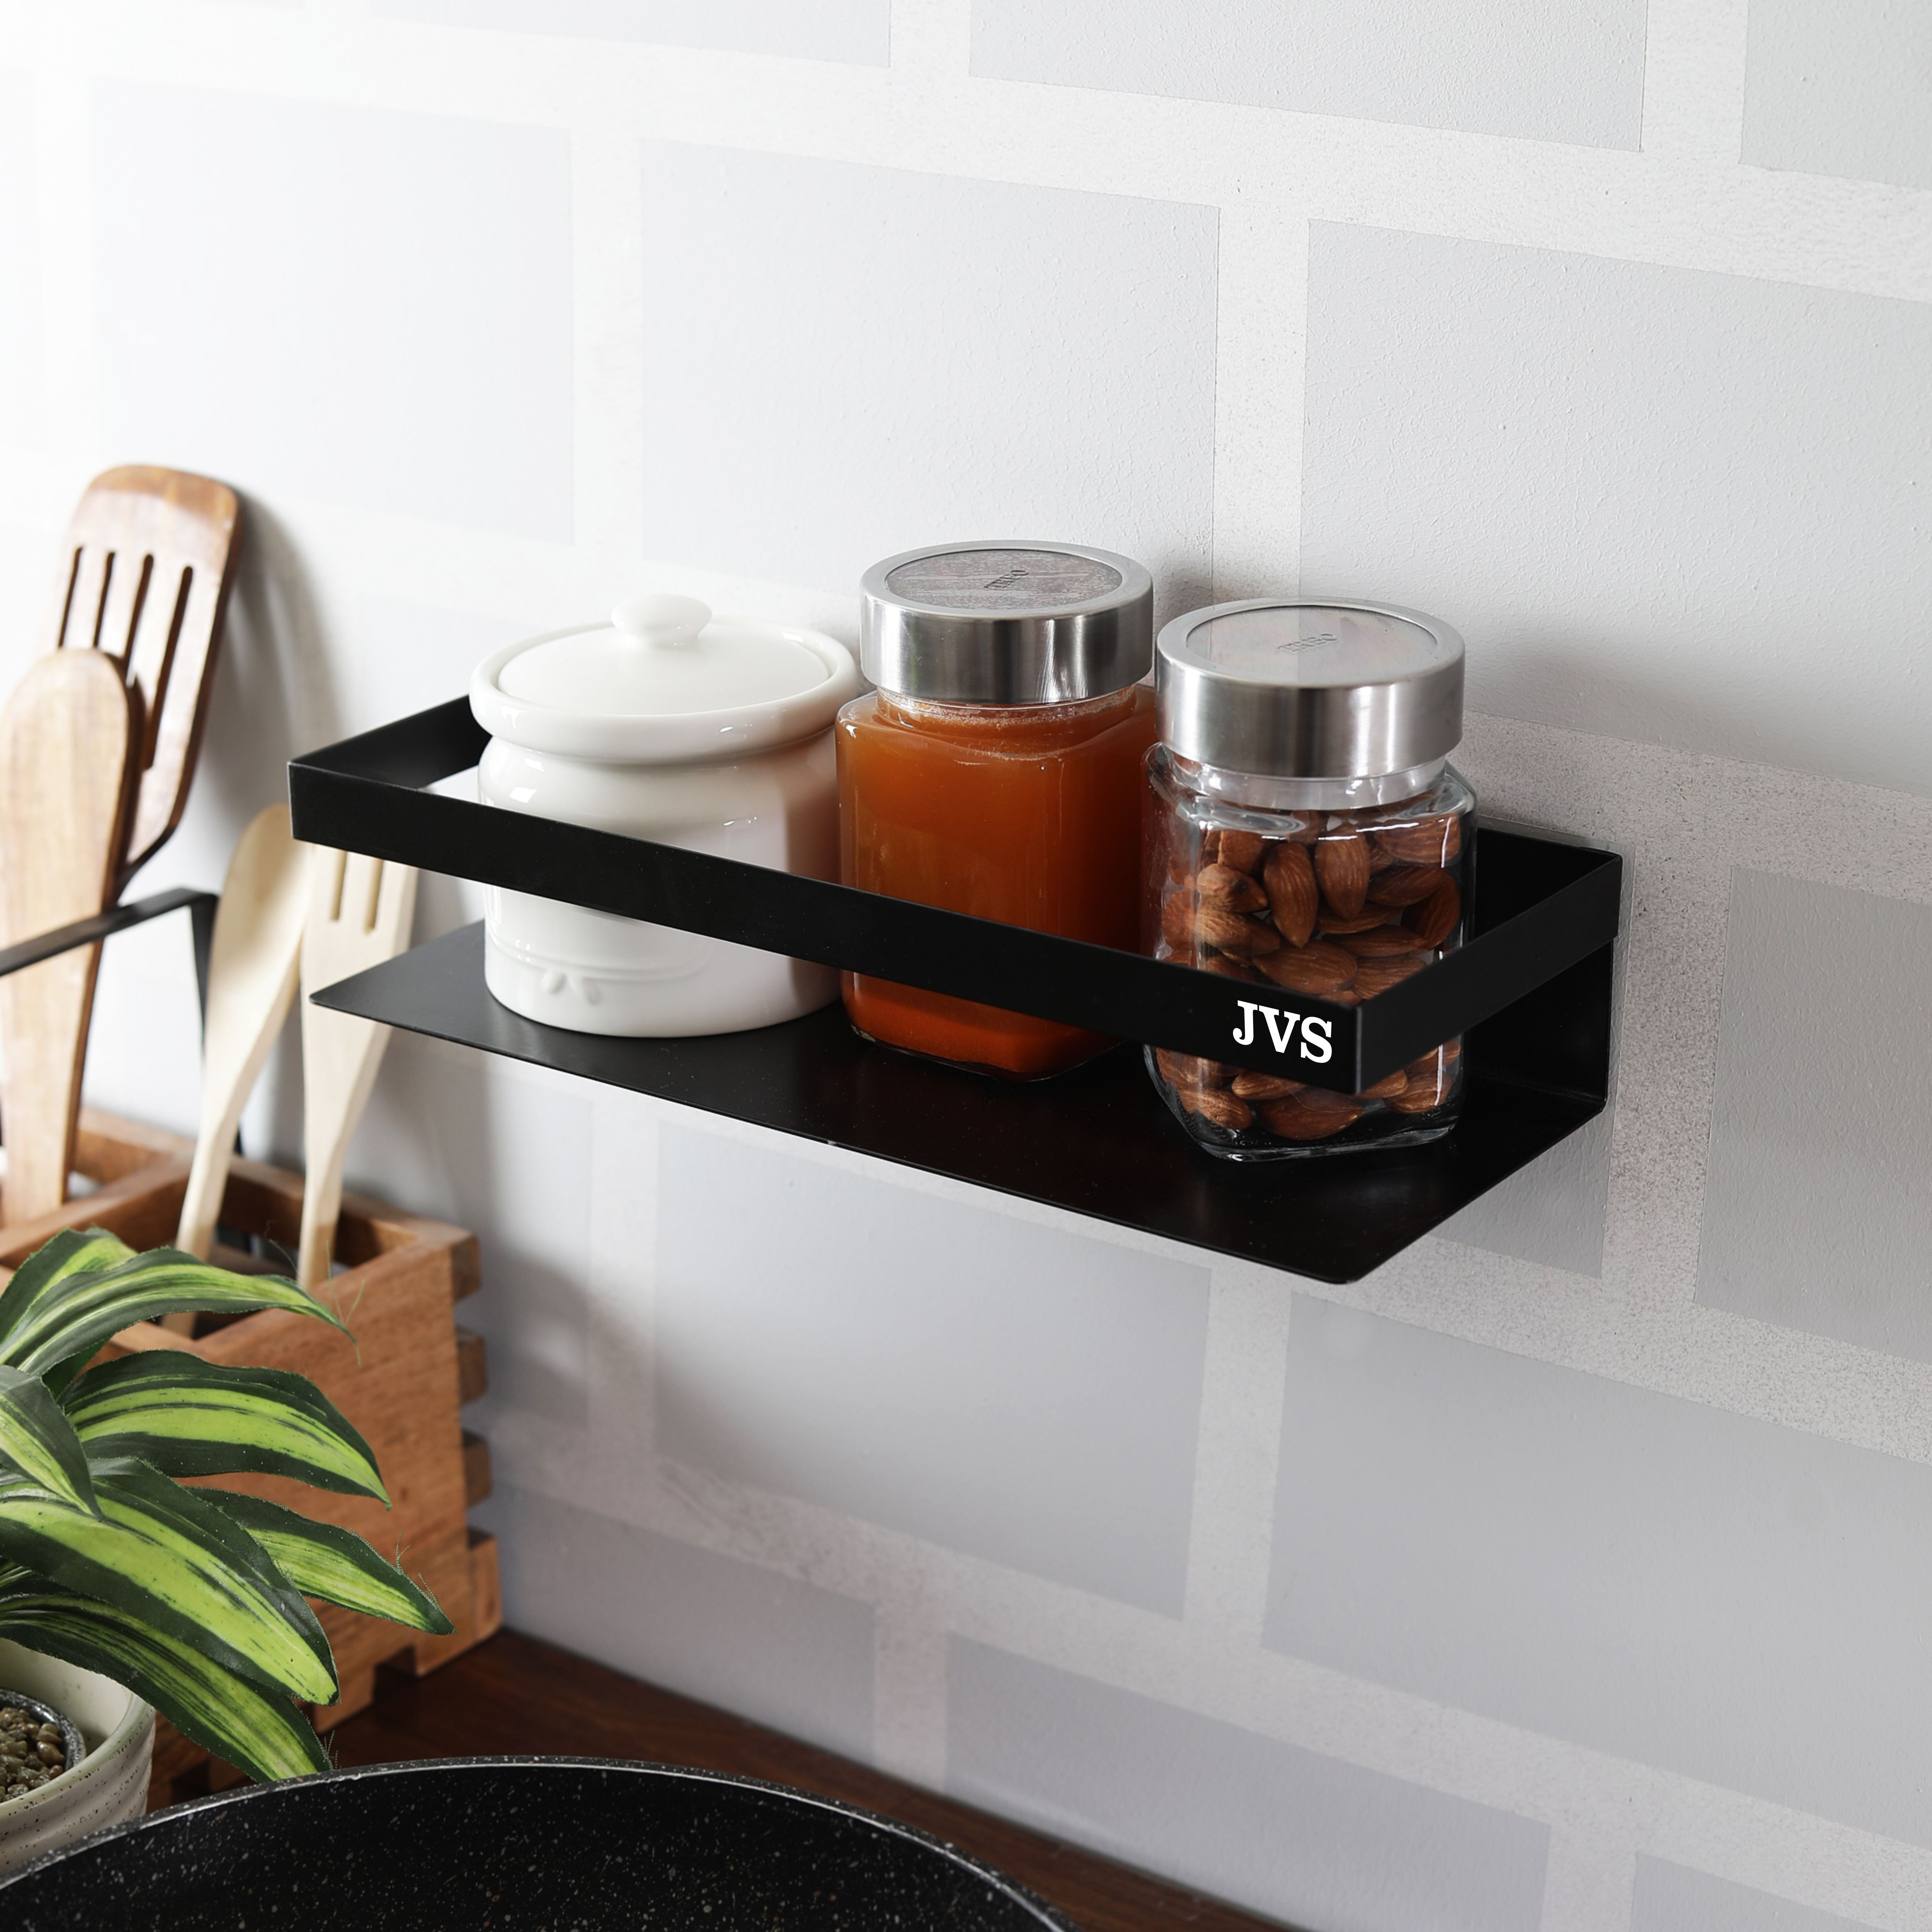 Simple Stainless Steel Kitchen Shelves with Simple Decor